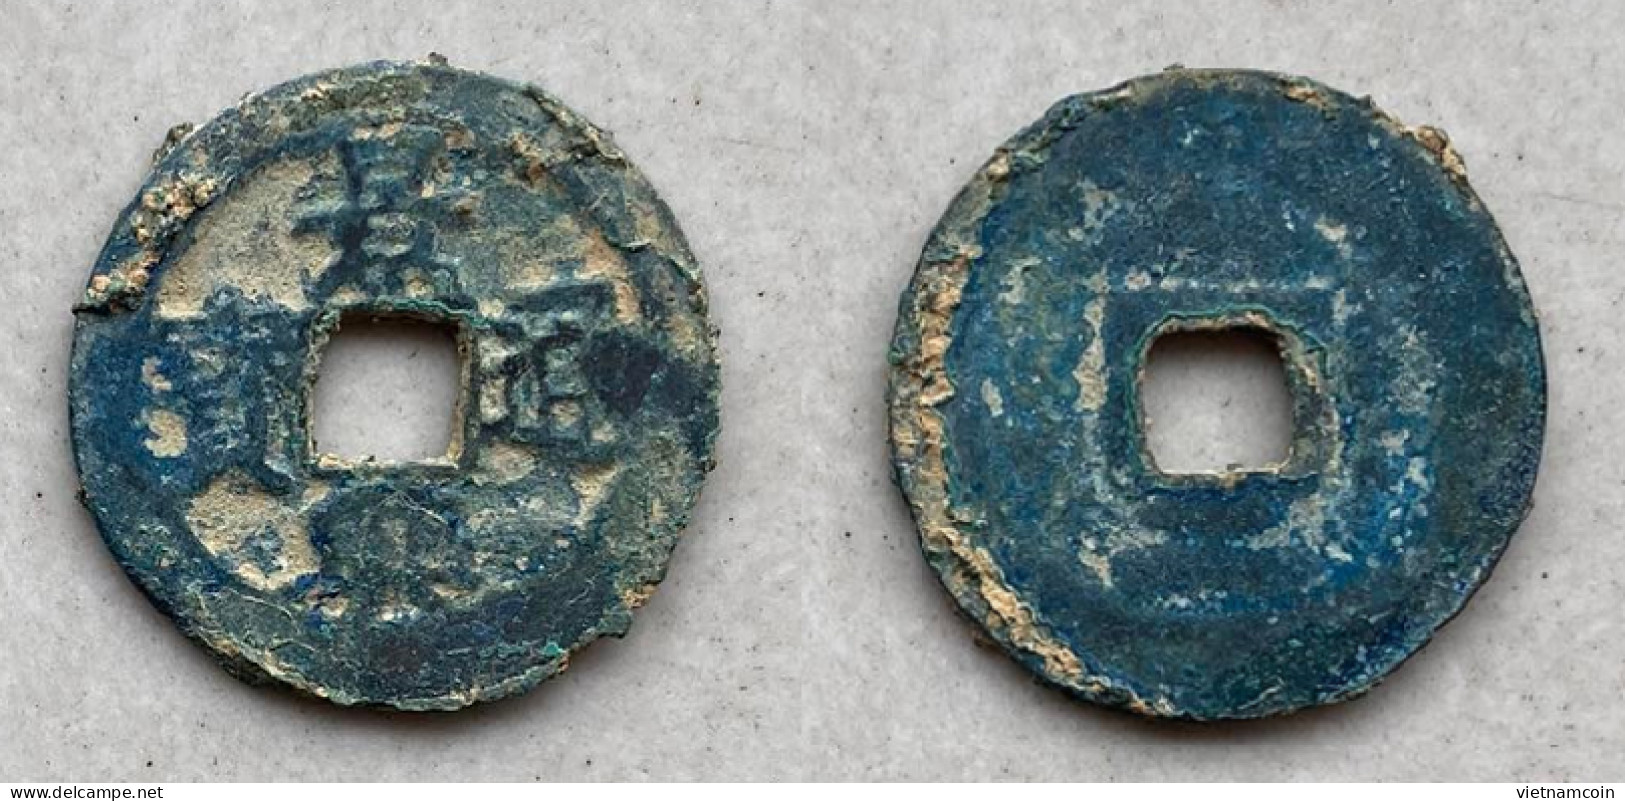 Ancient Annam Coin Canh Hung Thong Bao Reverse Cong - Le  Kings Under The Trinh 1740-1776 - Viêt-Nam